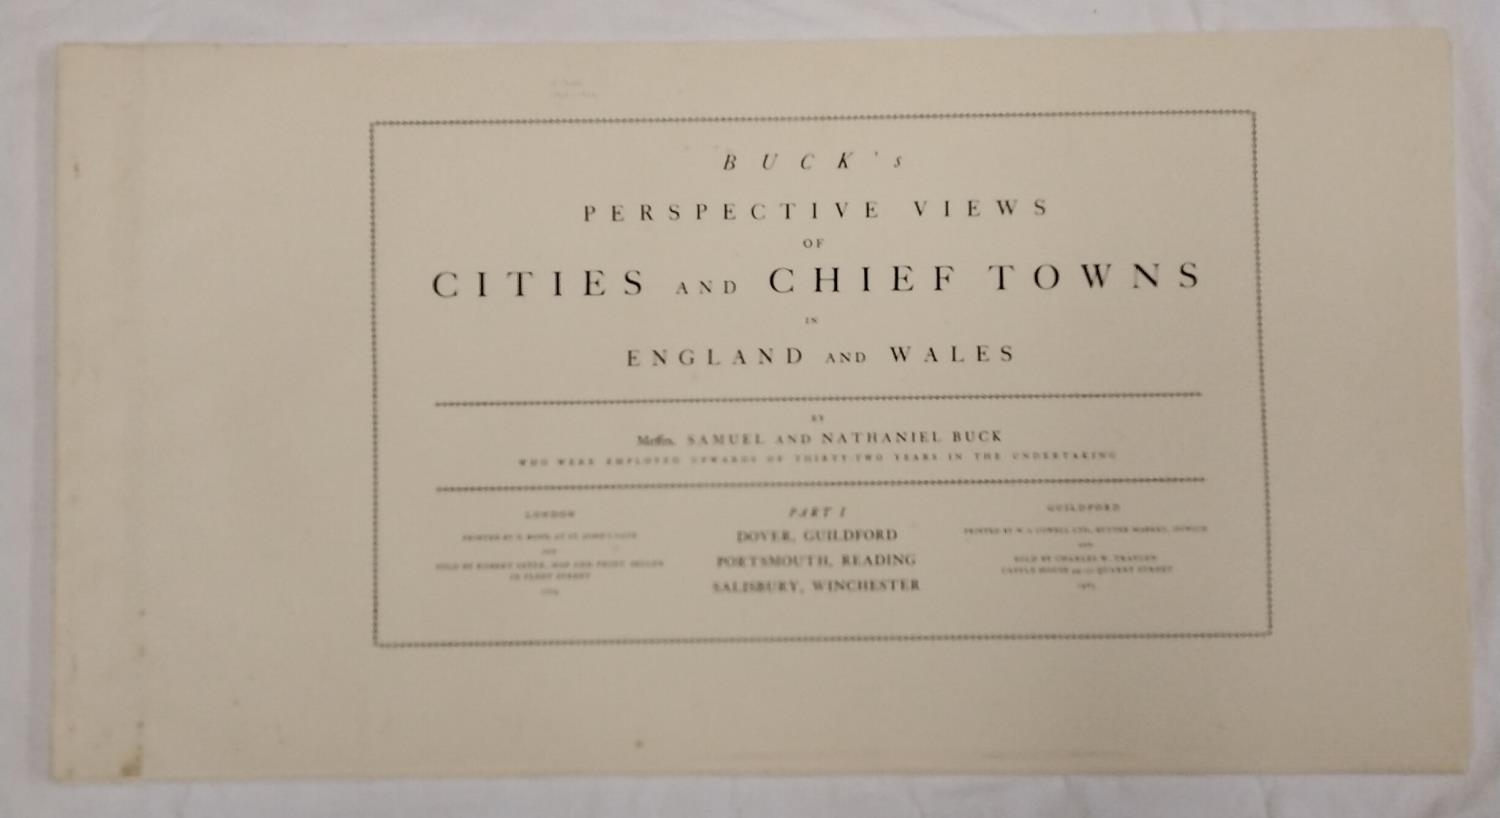 Buck's Perspective Views of Cities and Chief Towns in England and Wales, by Messrs Samuel and